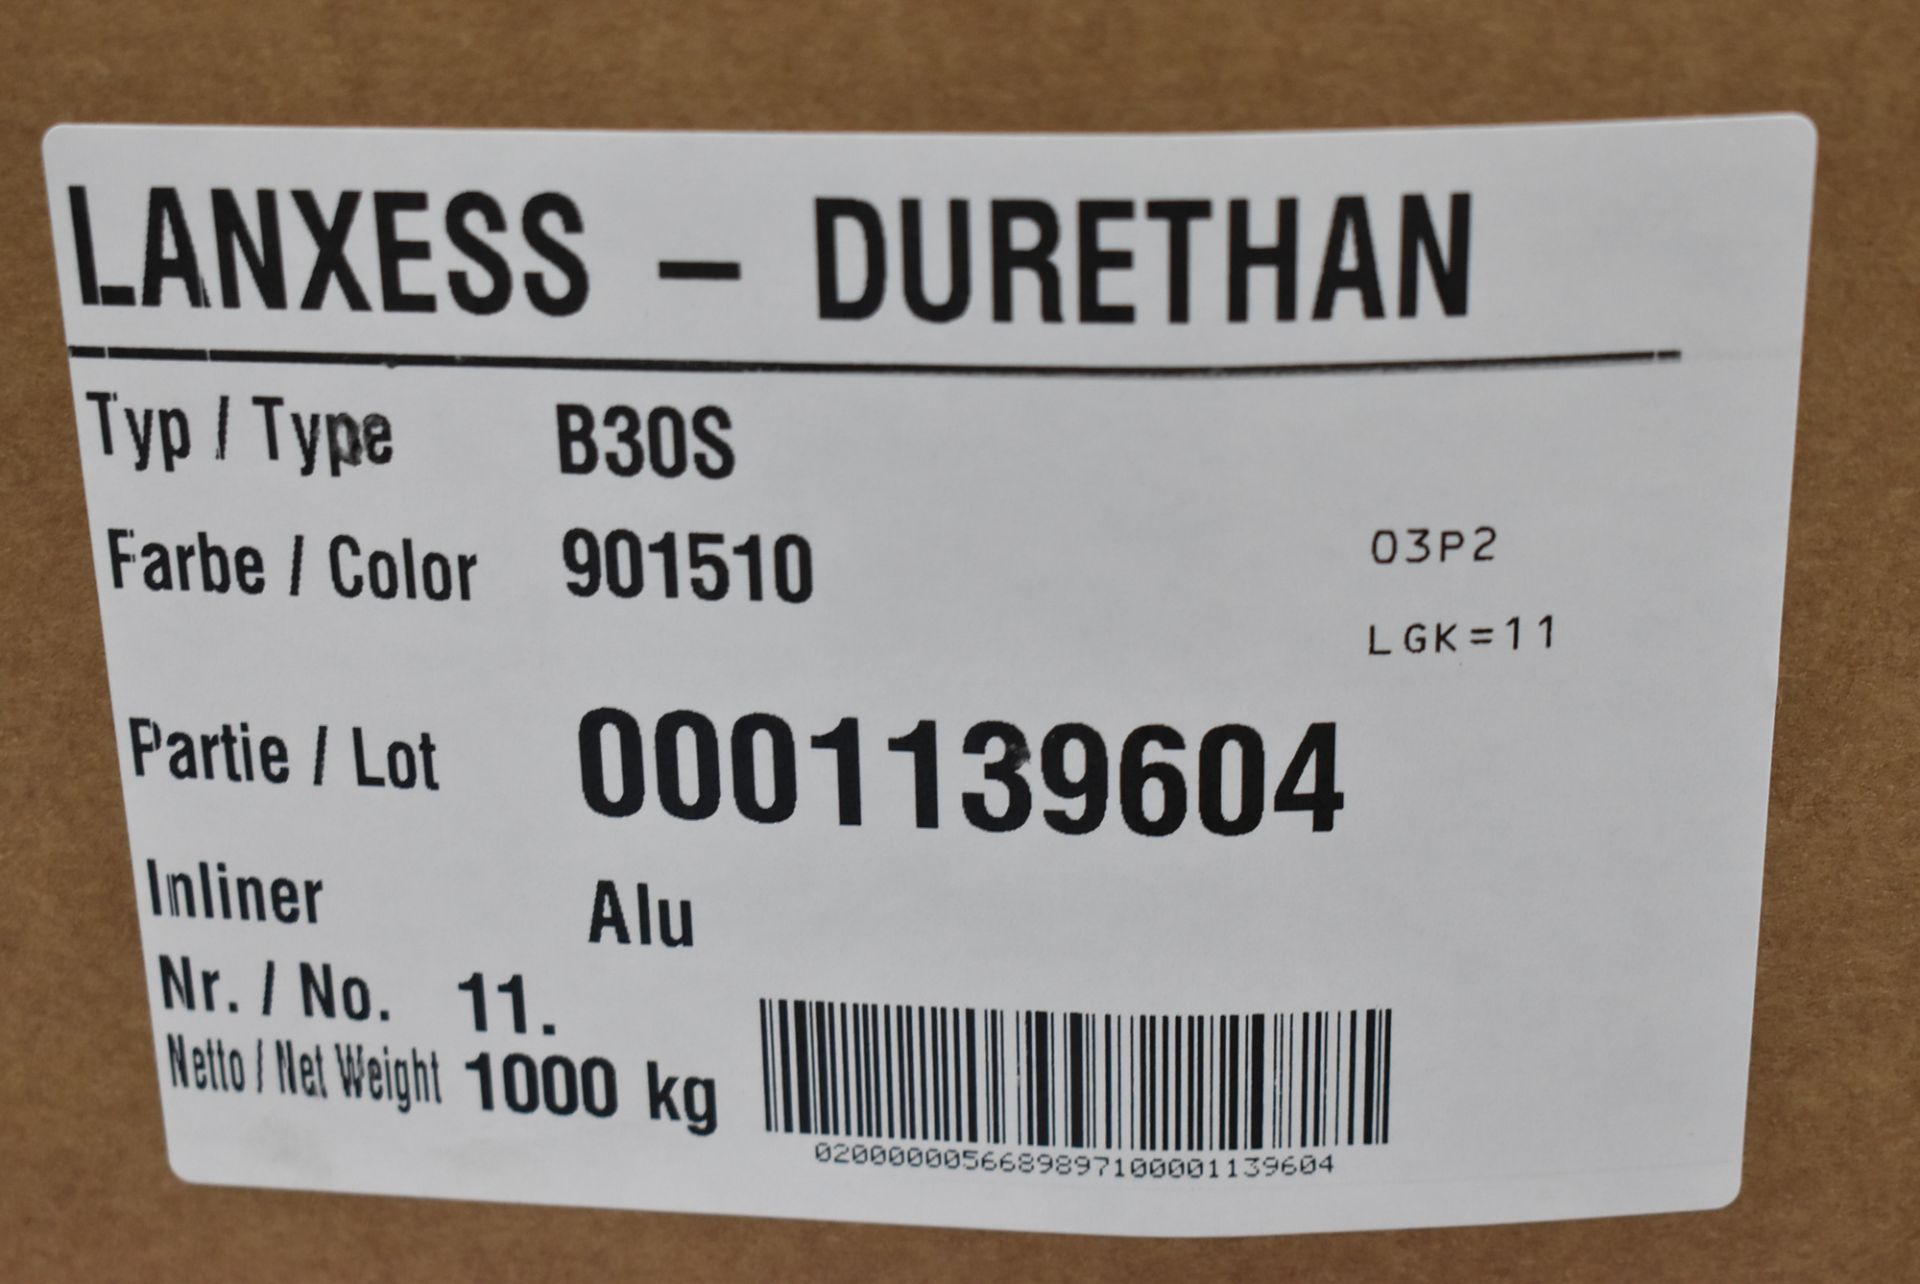 LOT/ SKID OF LAXNESS-DURATHAN BLACK NYLON (APPROX. 1,000 LBS.) - Image 2 of 2